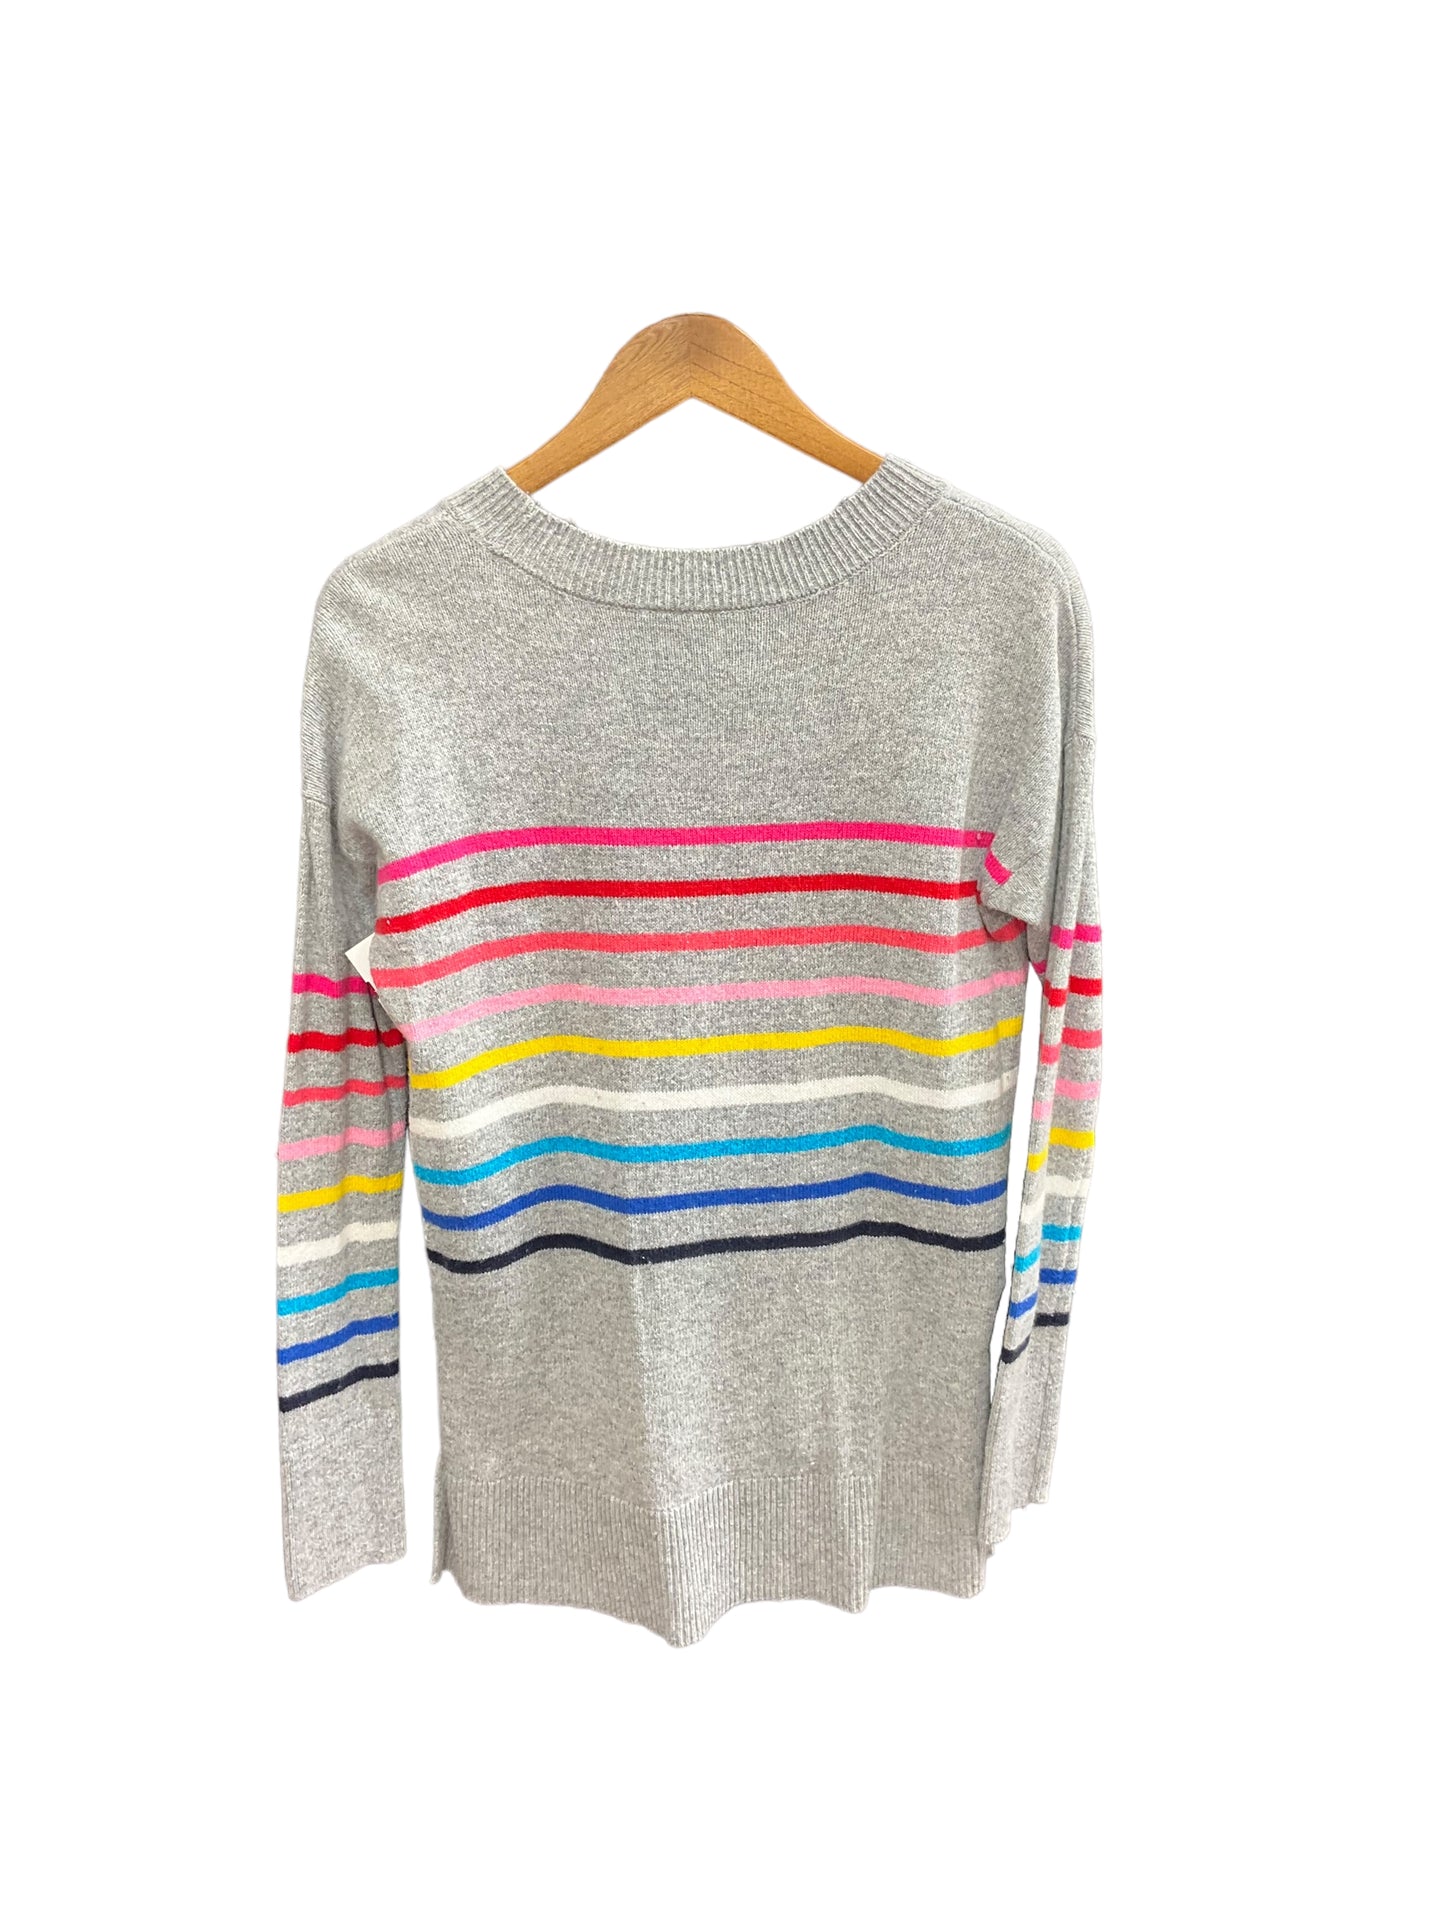 Sweater By Gap  Size: M